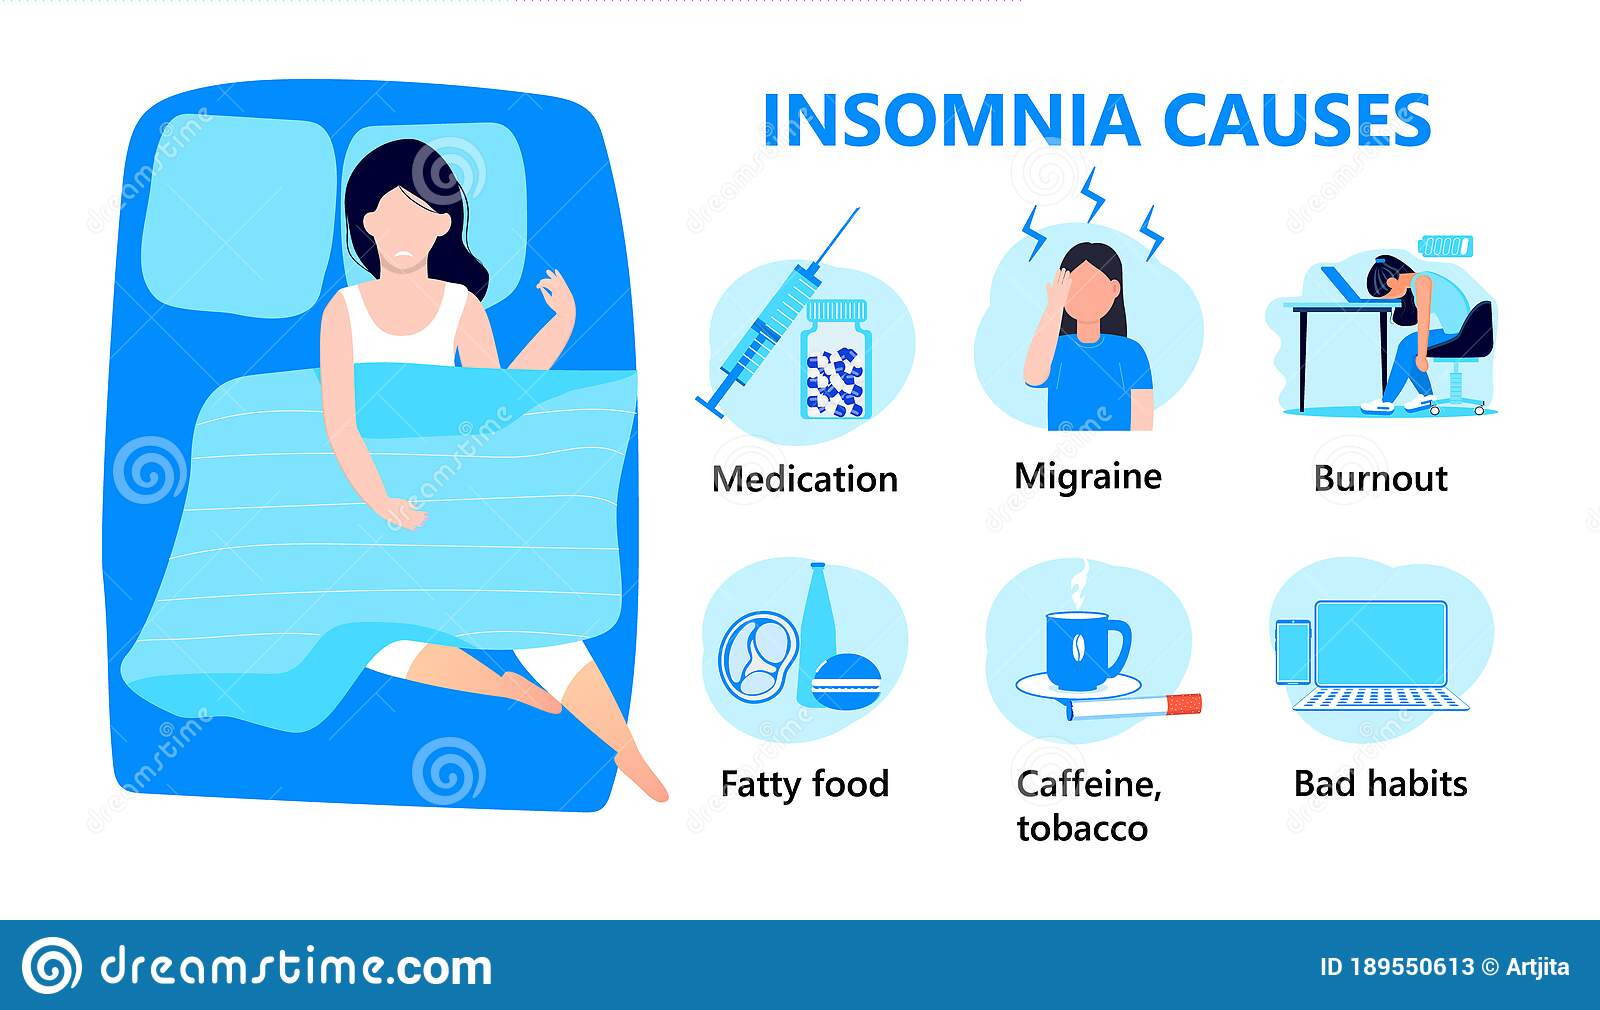 Insomnia Causes Info